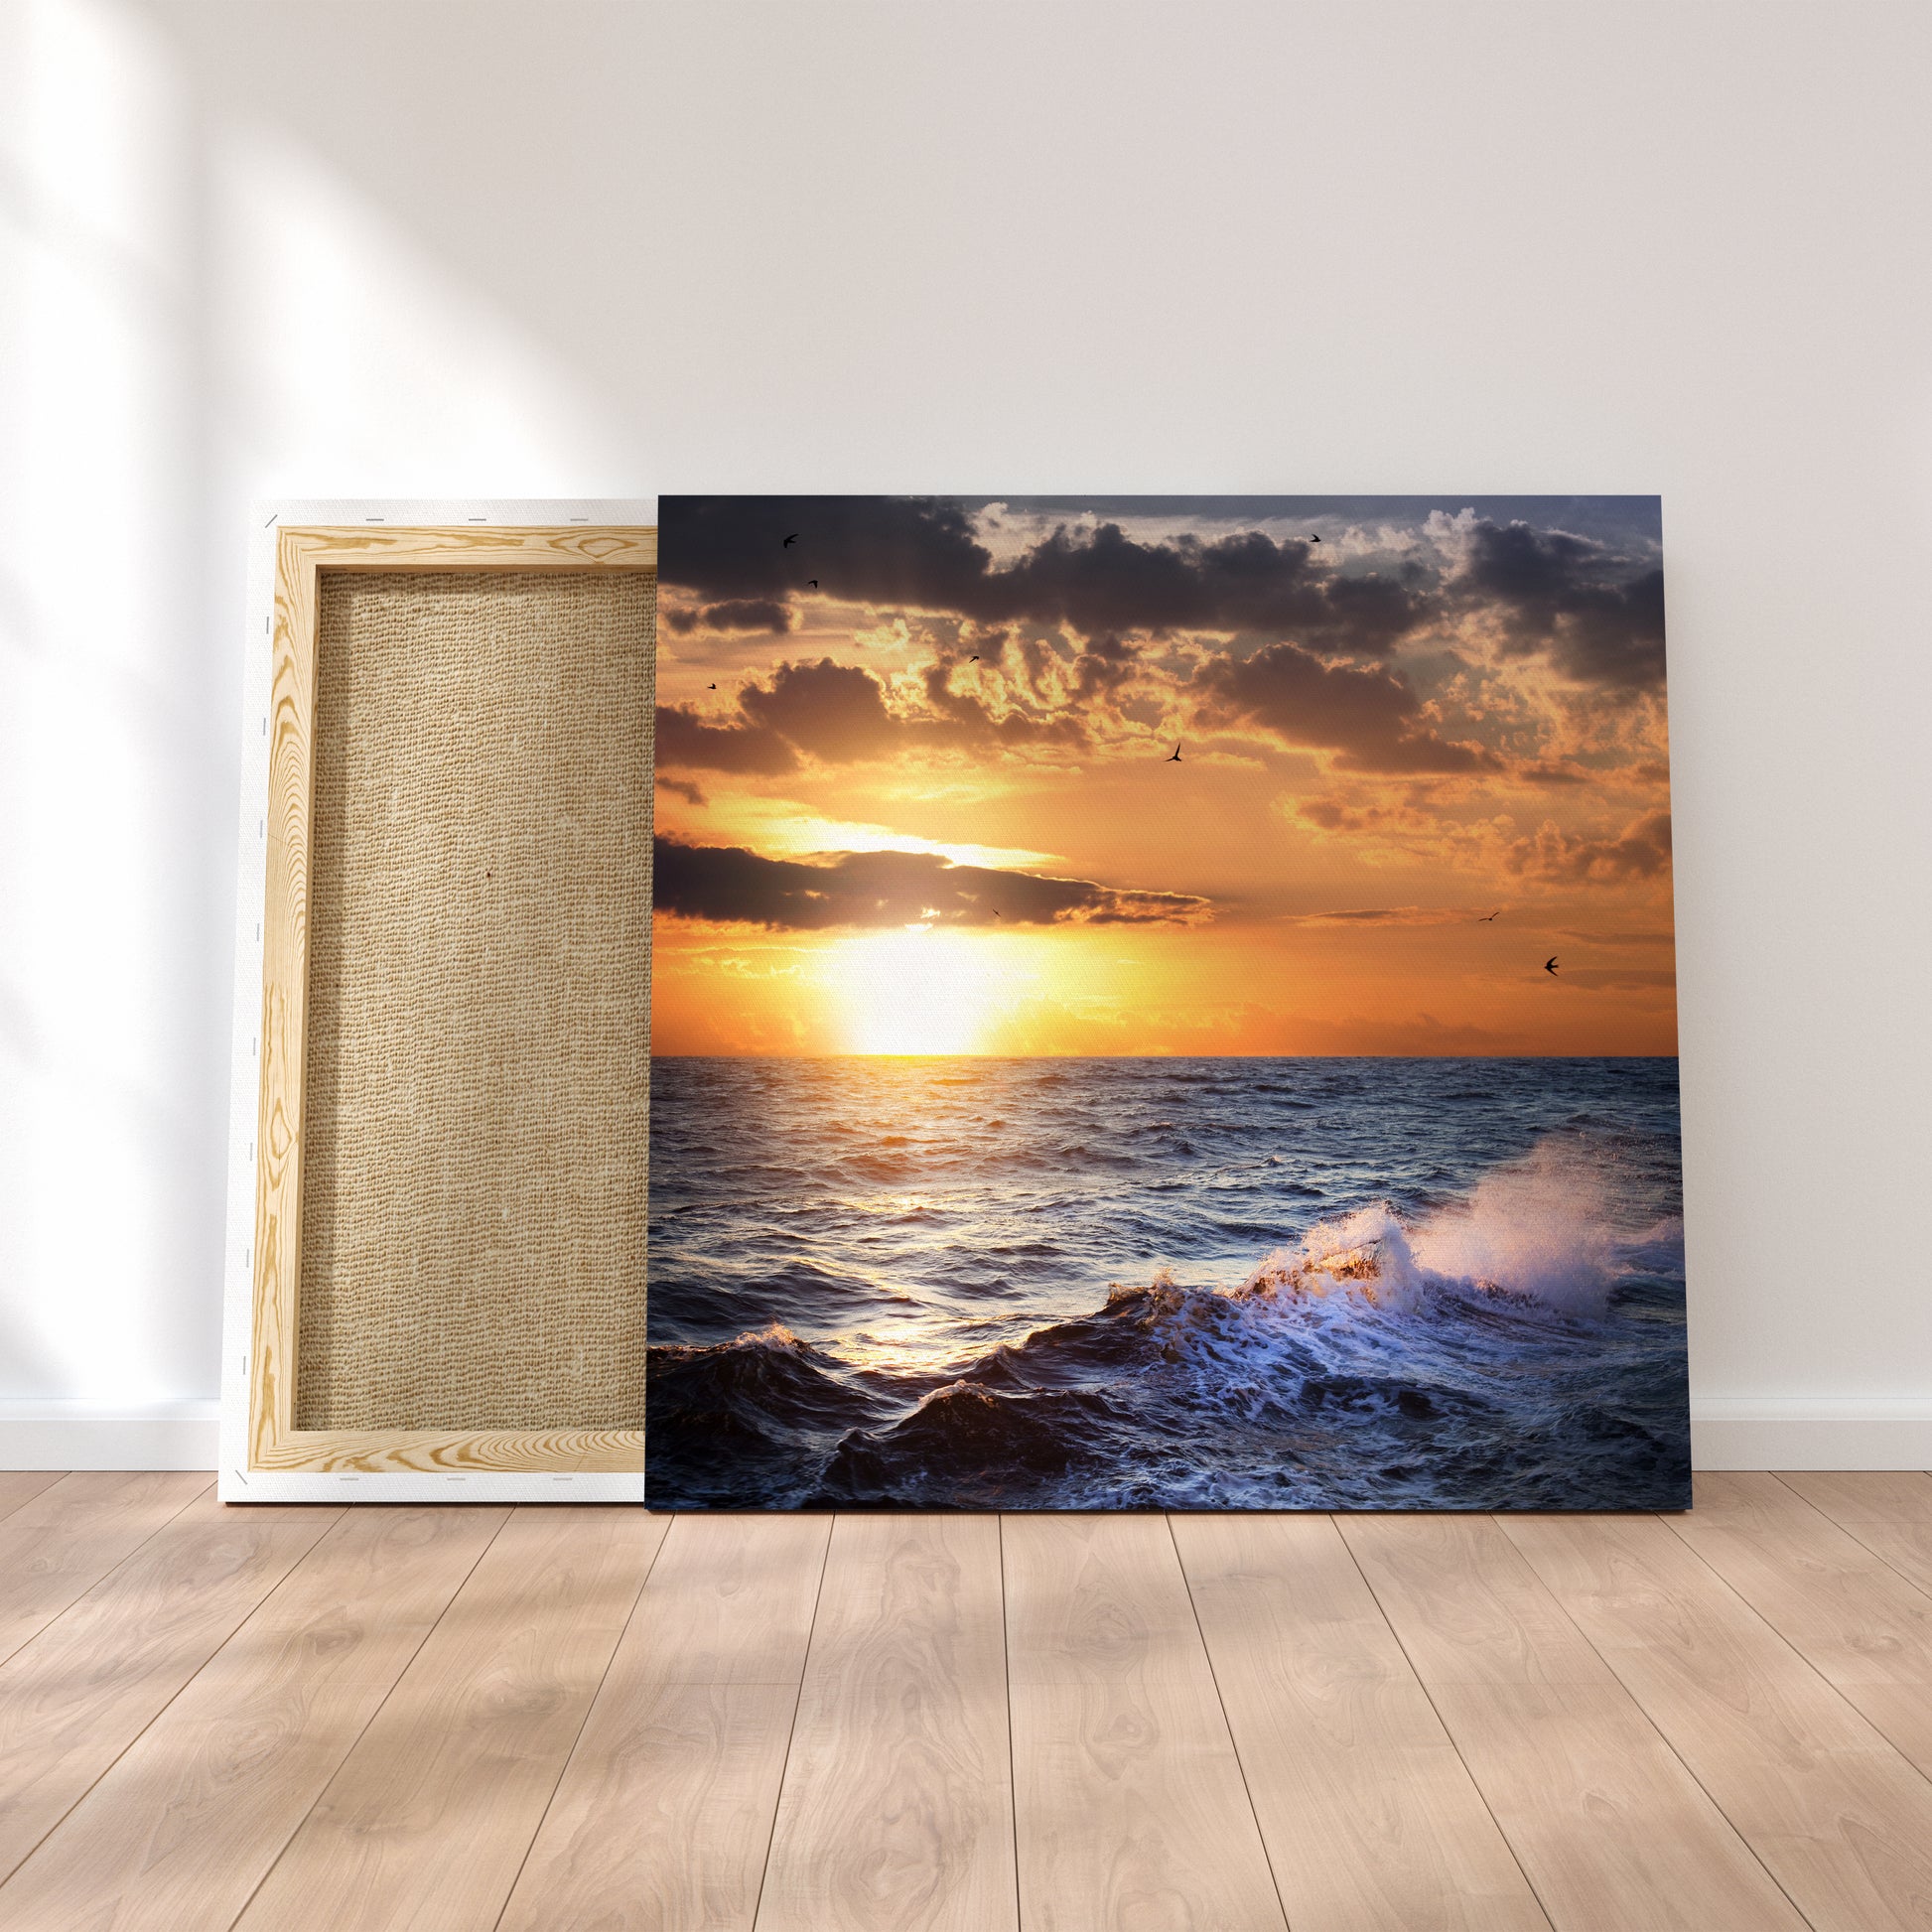 Beautiful Stormy Sea At Sunset Canvas Print ArtLexy 1 Panel 12"x12" inches 